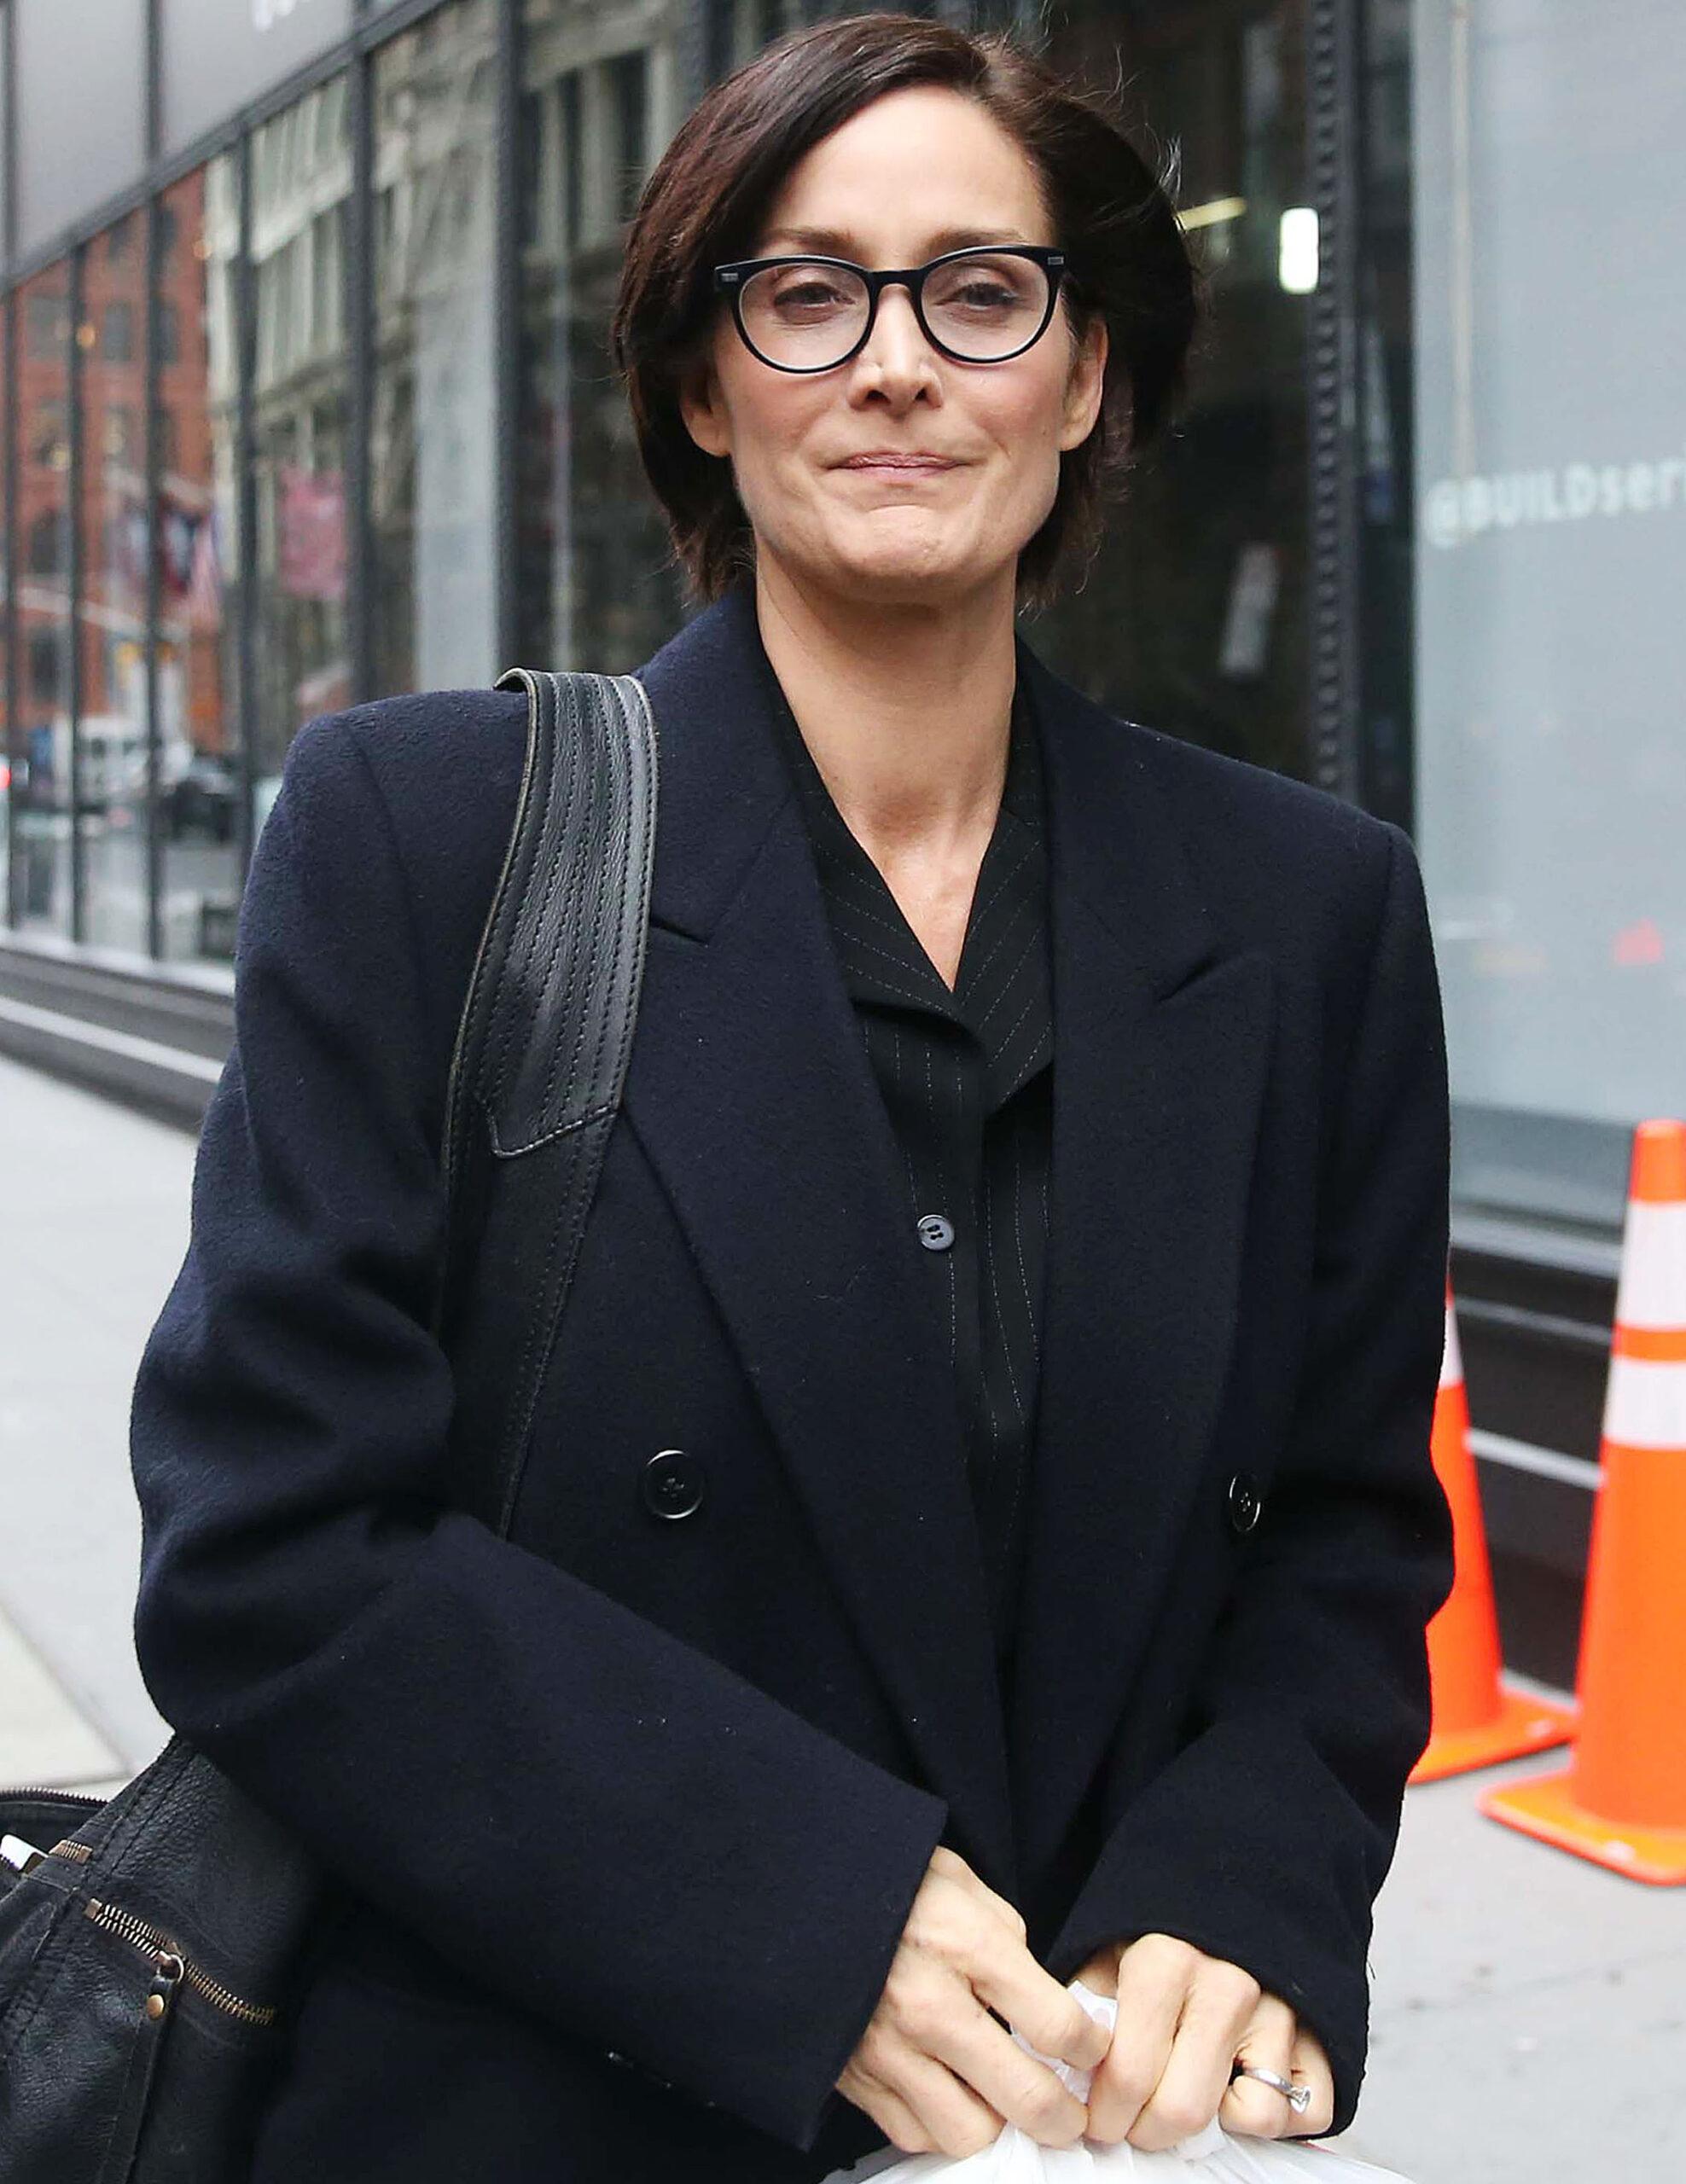 Carrie-Anne Moss out and about in New York